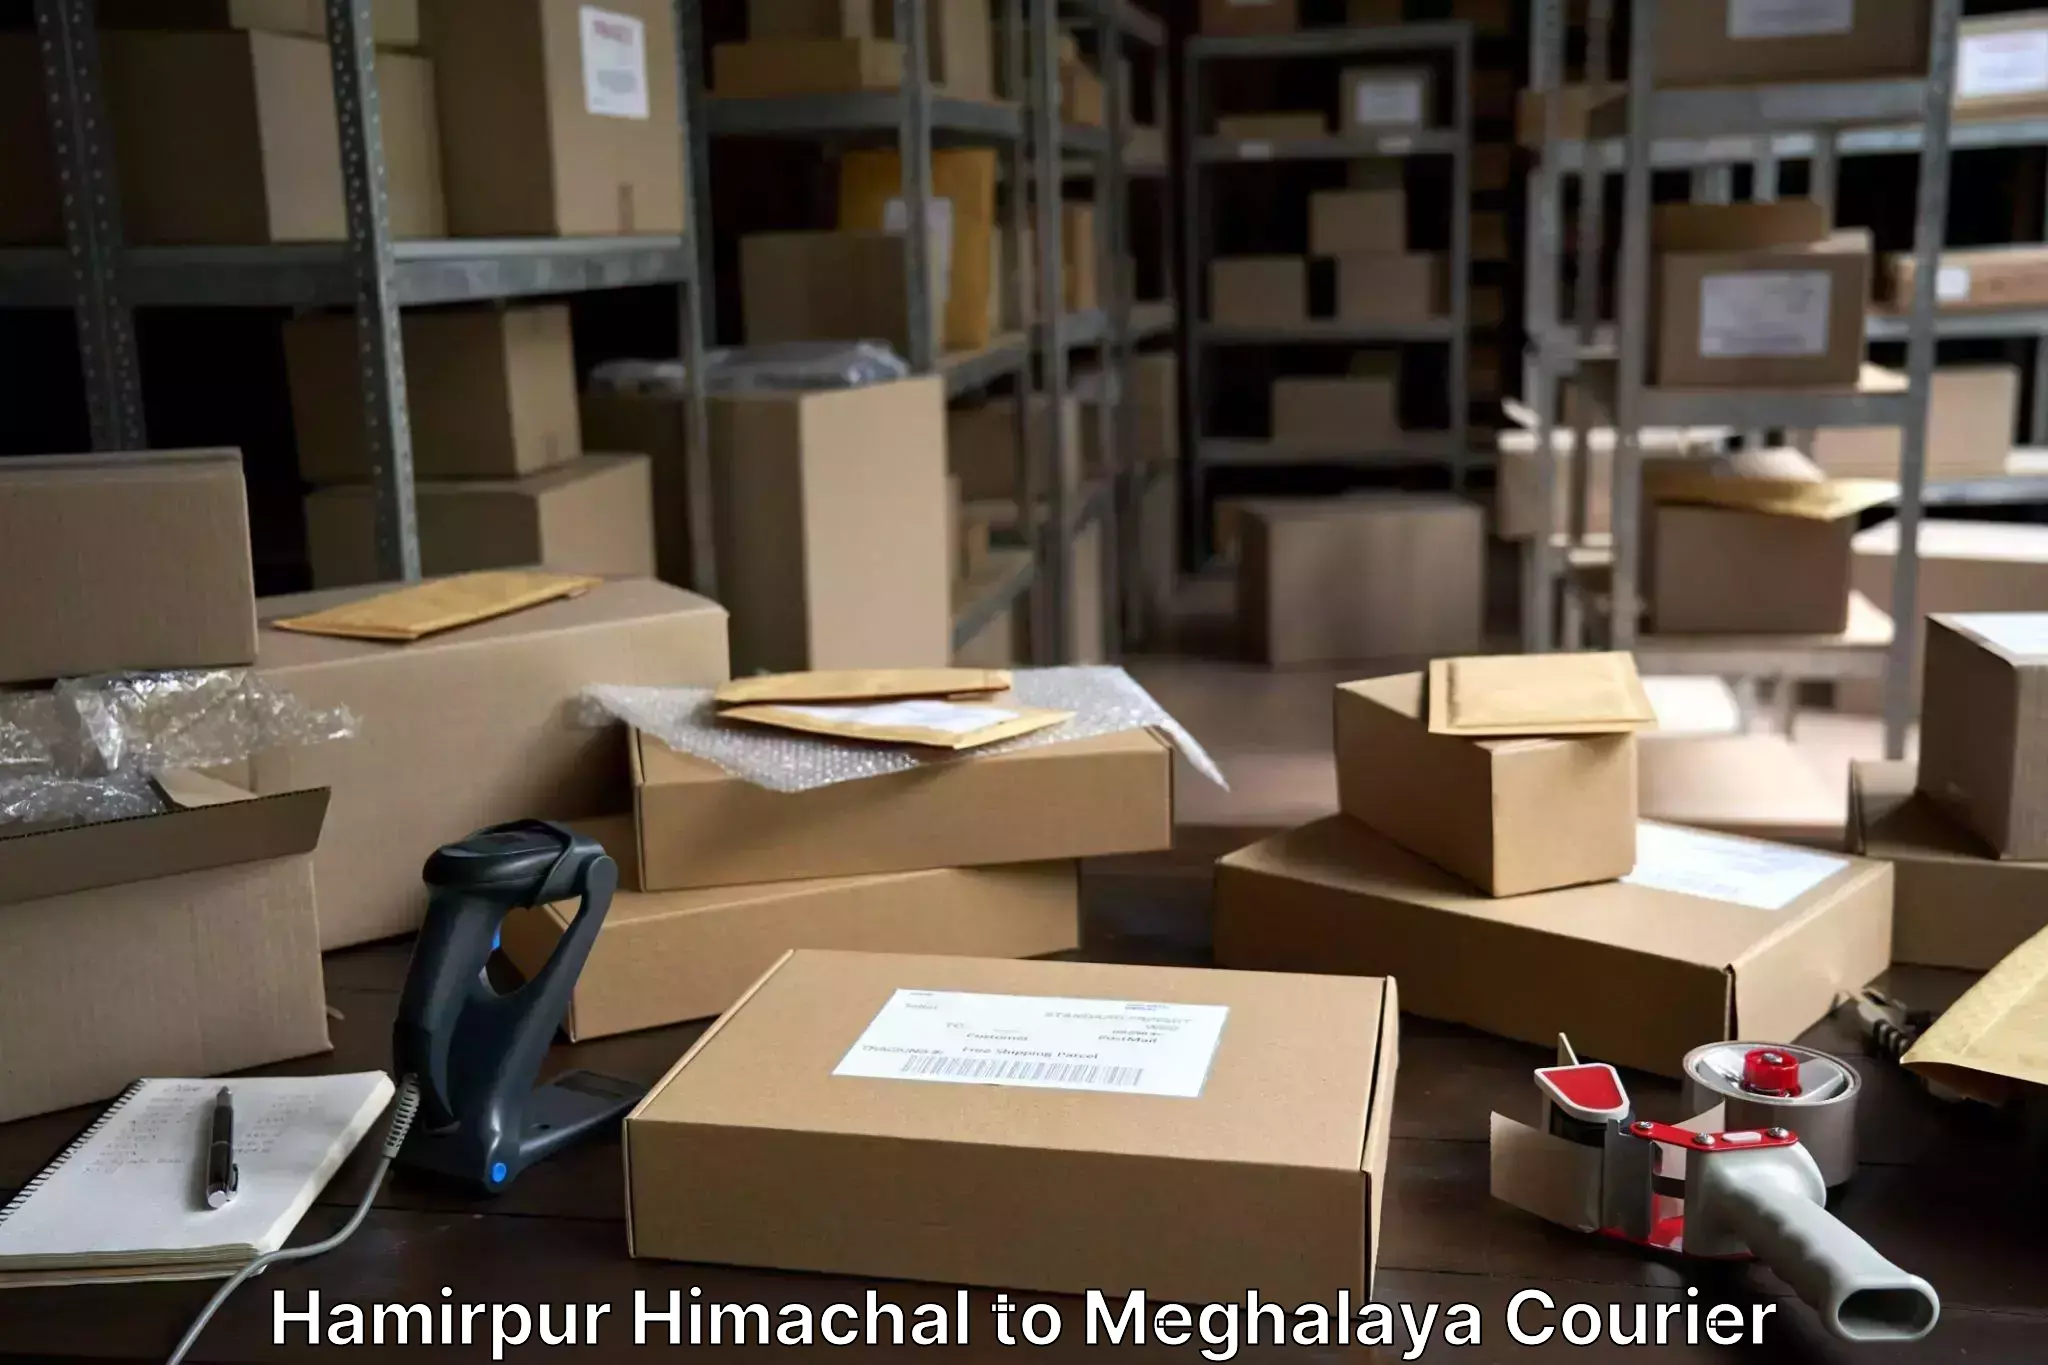 Personal effects shipping in Hamirpur Himachal to Cherrapunji